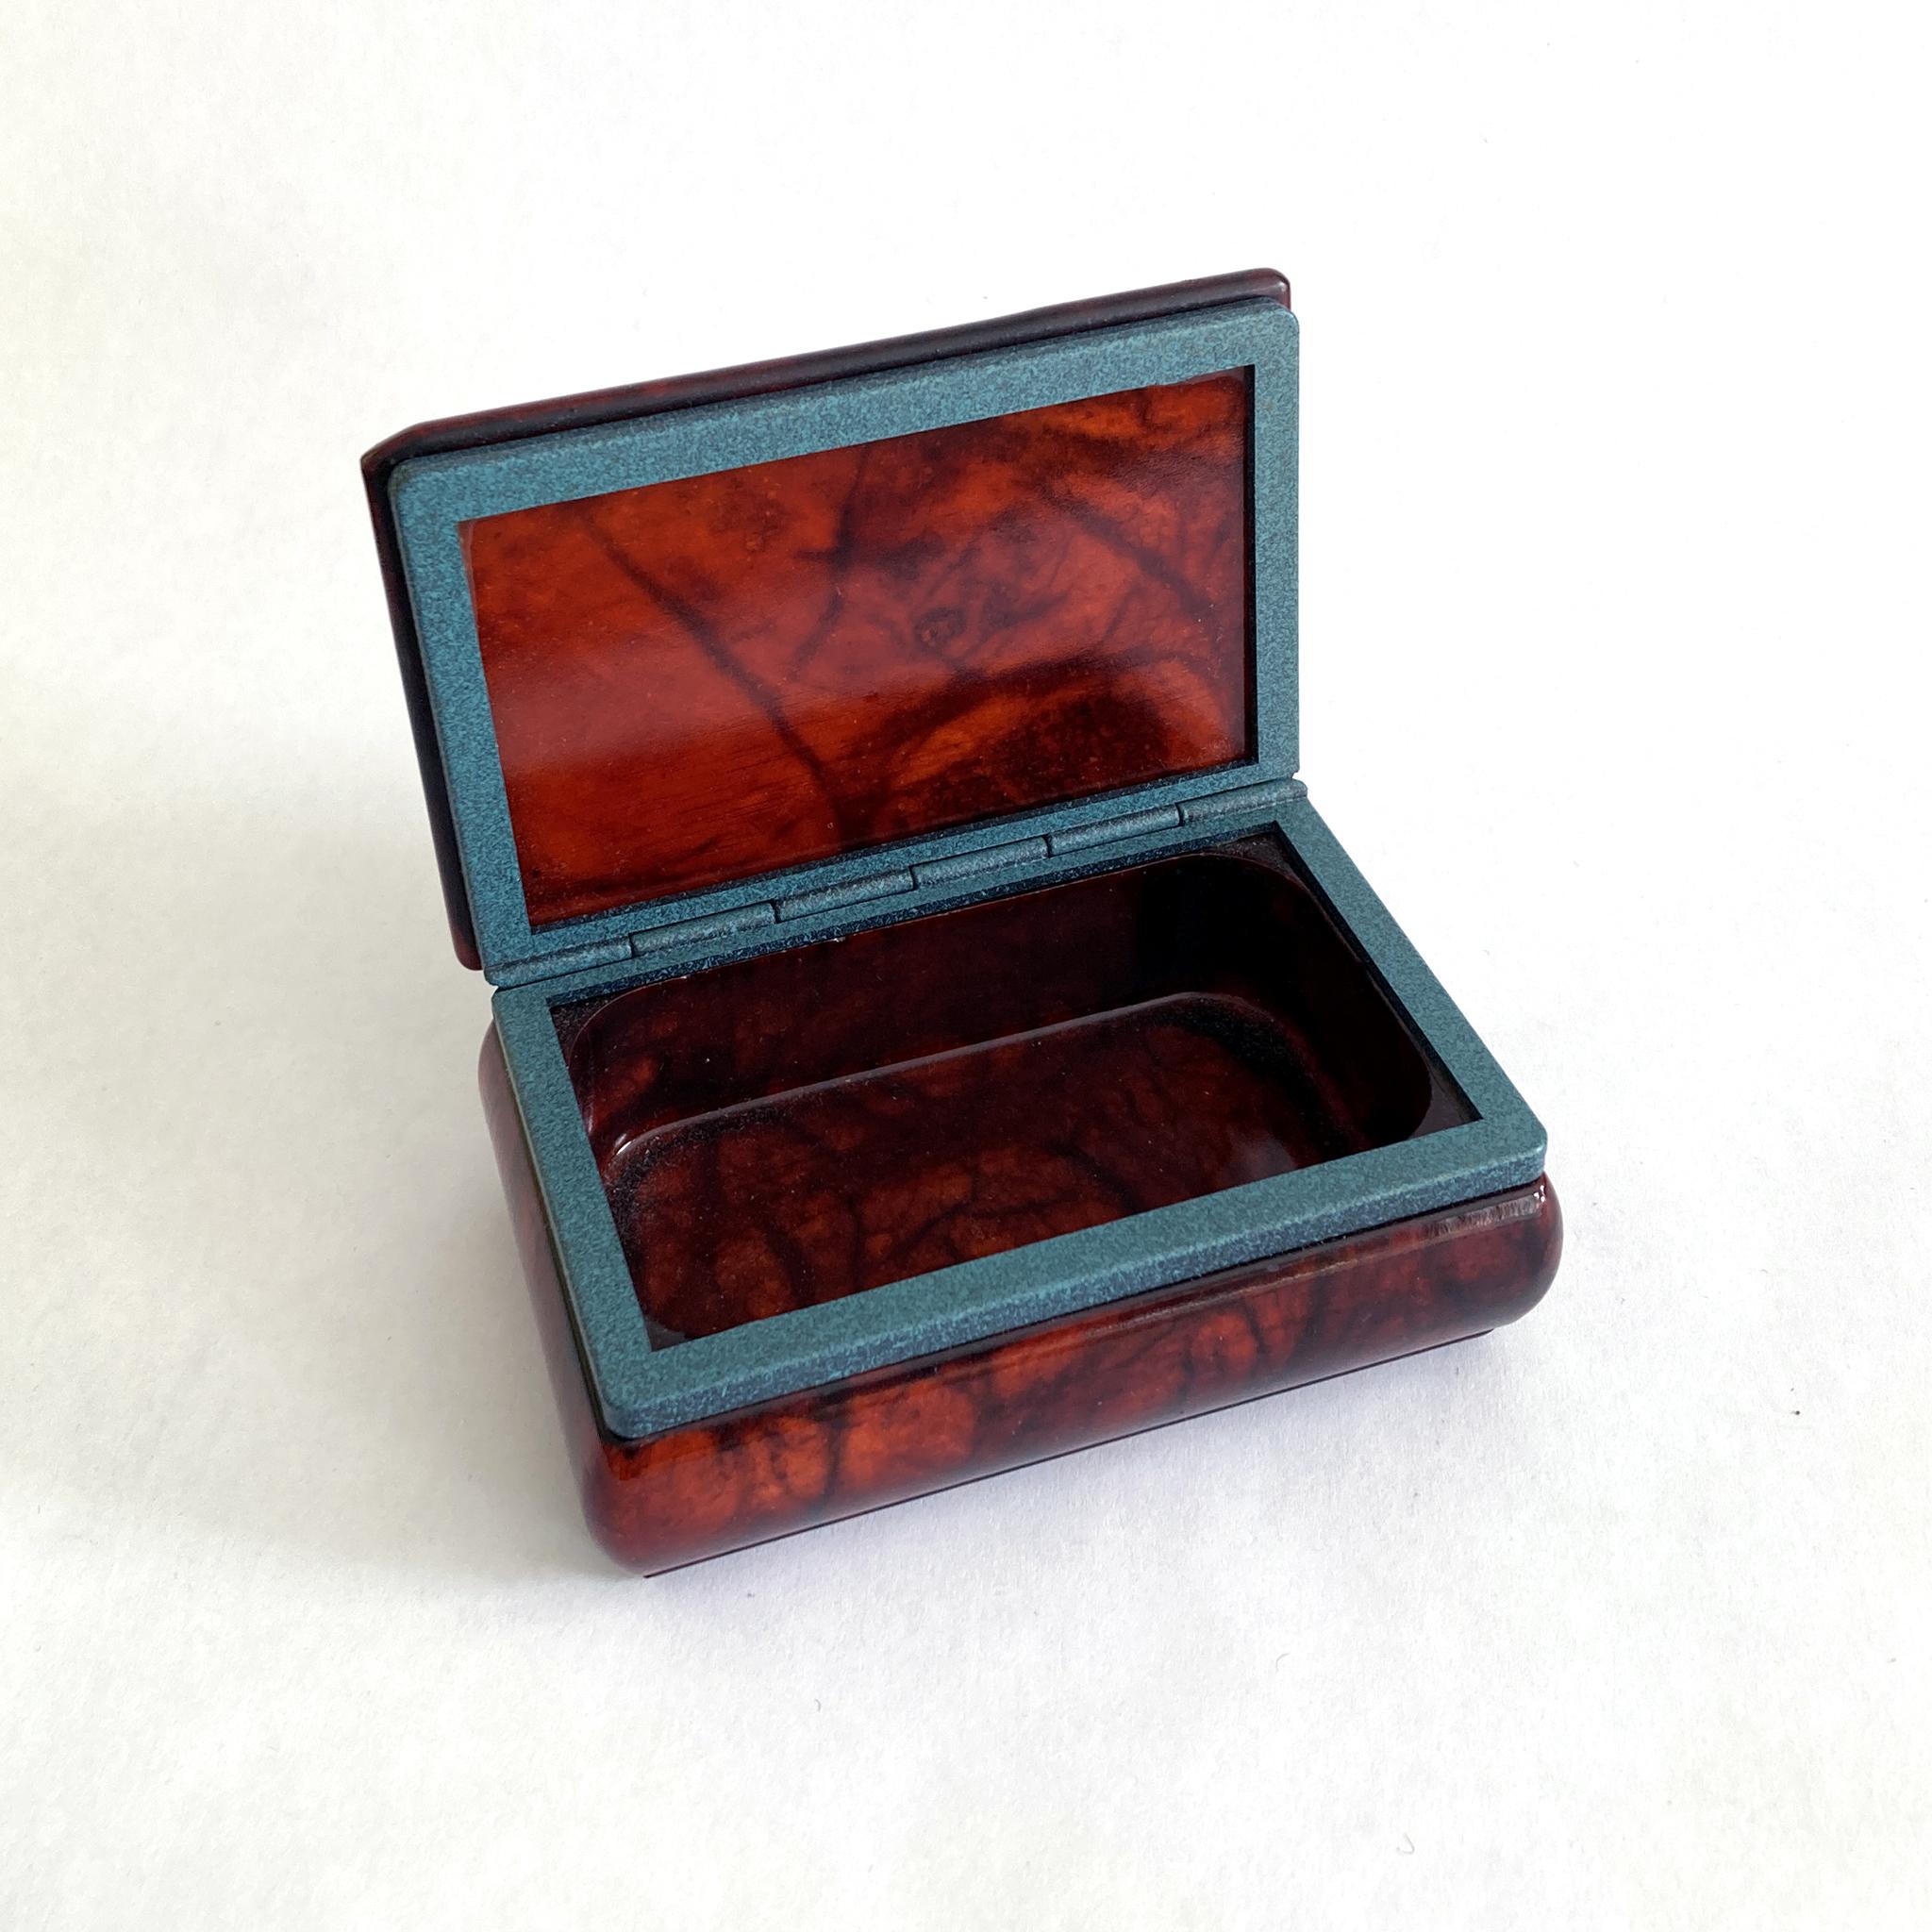 Hand-Carved Alabaster Rectangular Hinged Box in Brown Red with Blue Hinge, Italian, 1970s